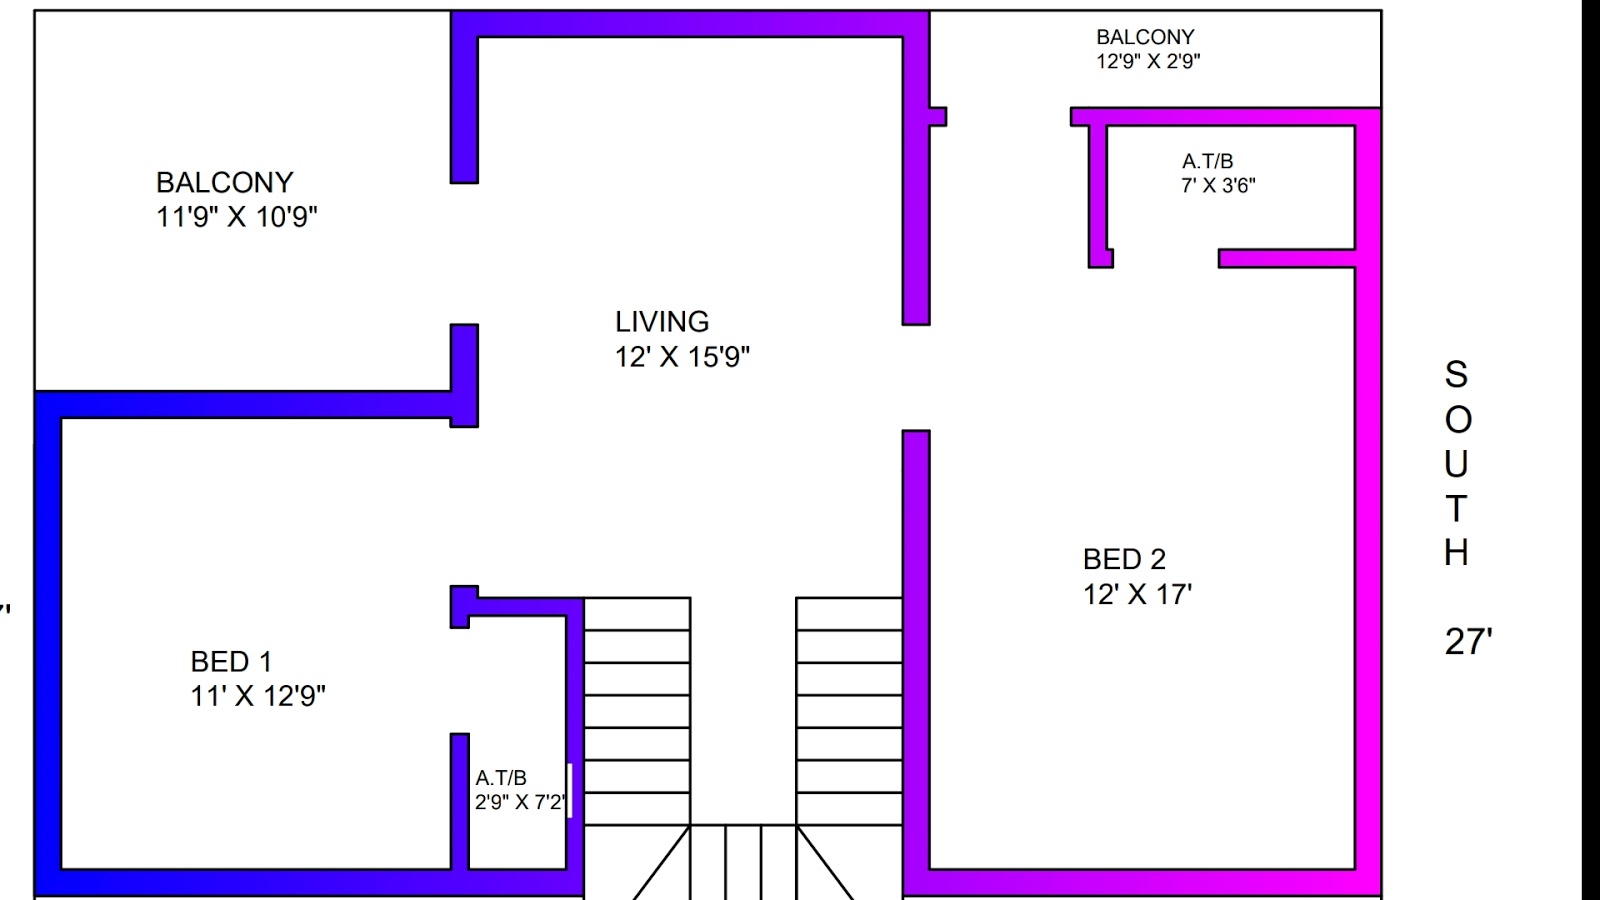 1 Bedroom Duplex House Plans Search Your Favorite Image